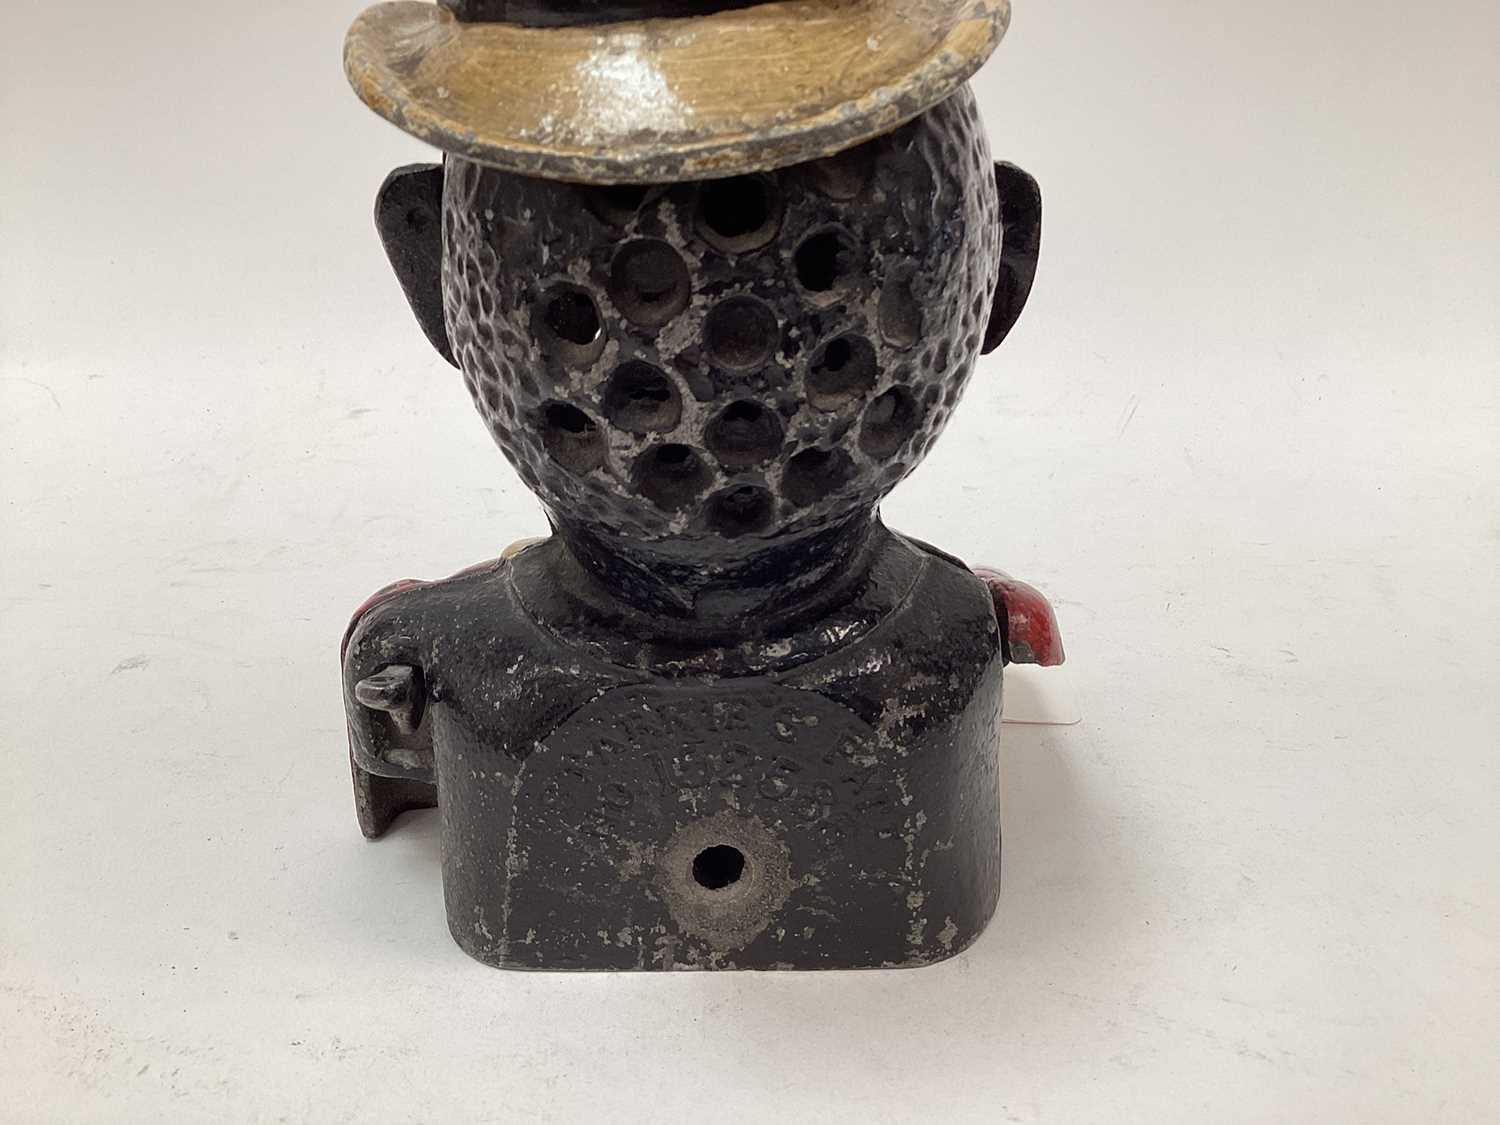 1920s/30s Starkie’s cast alloy “Gentleman with Top Hat” mechanical money box, with moveable arm, ton - Image 6 of 8